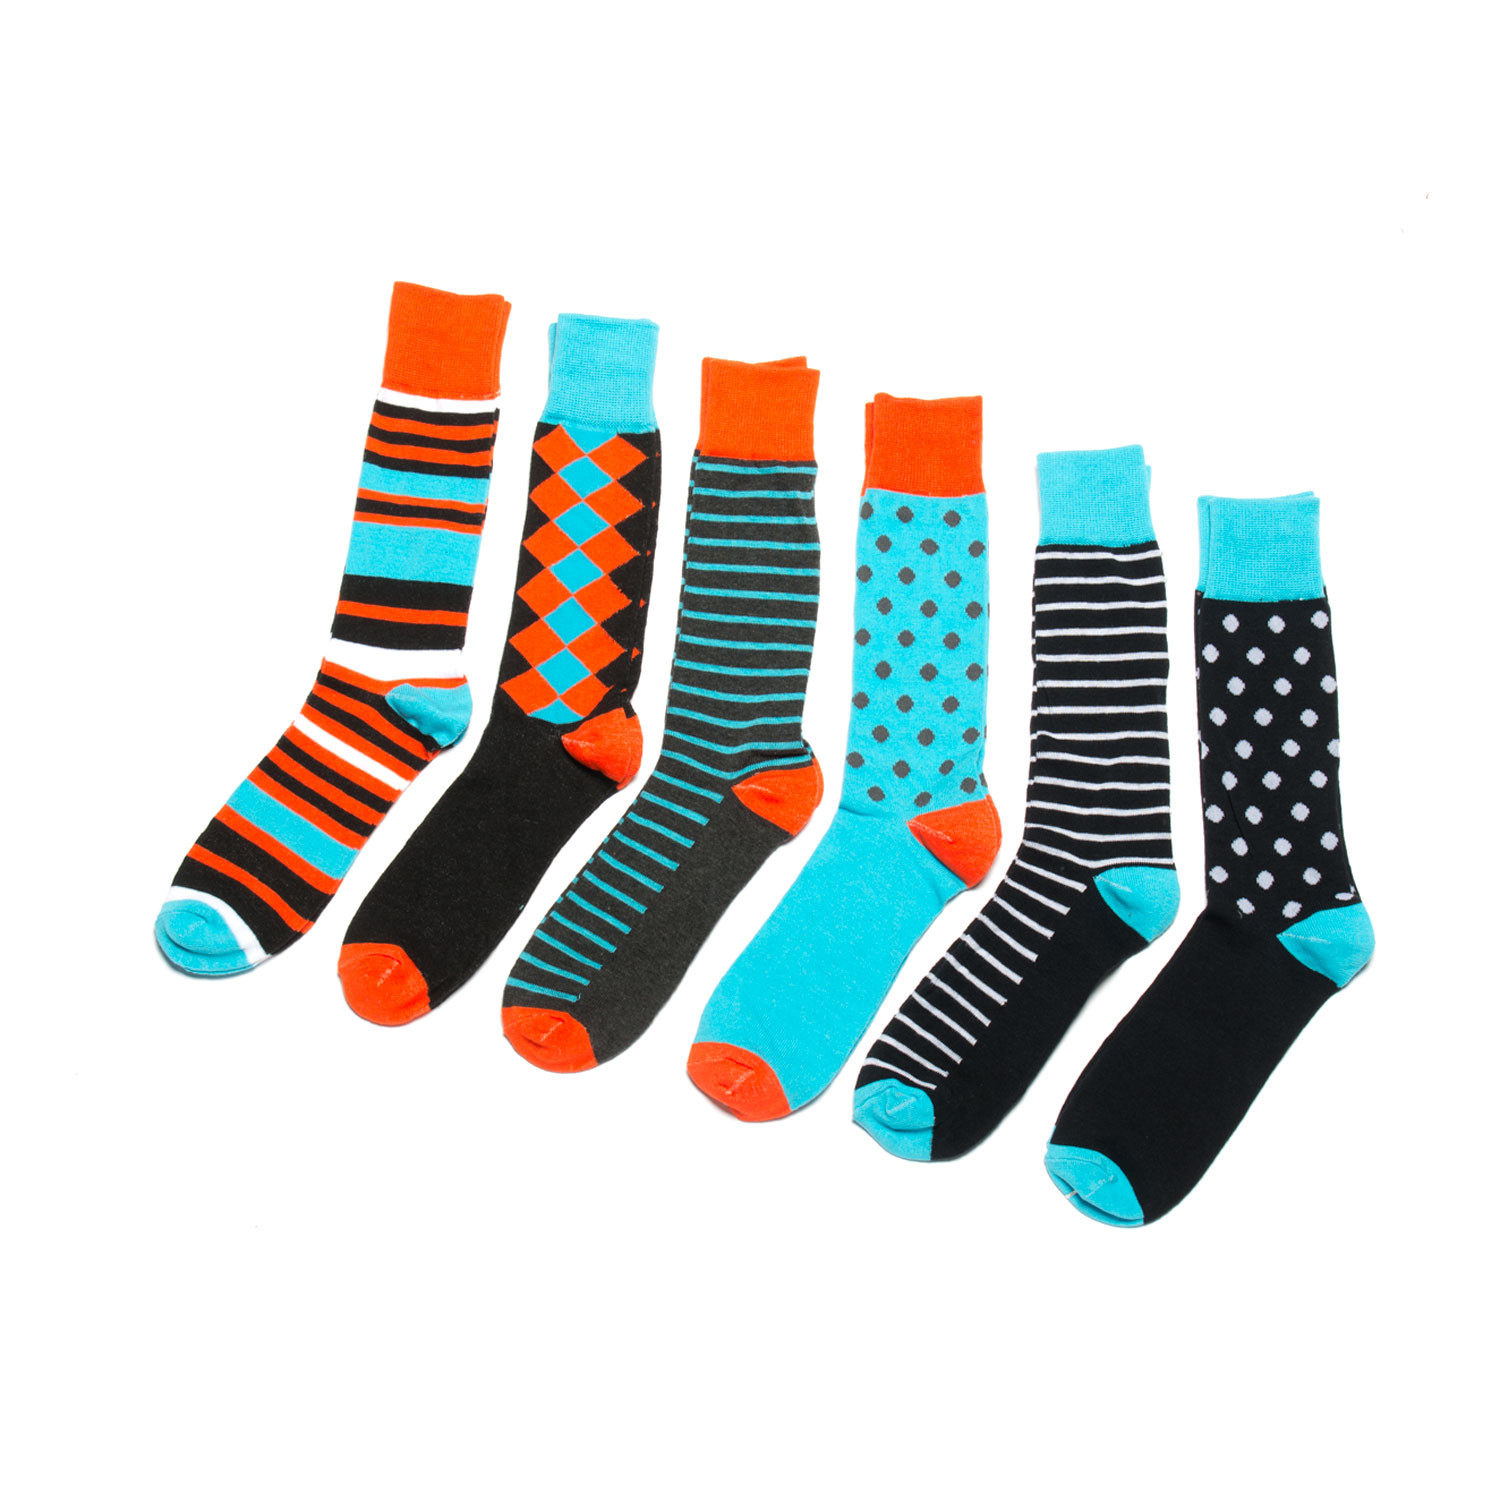 Itty Bitty Ditty // Six Pairs of Socks - English Laundry - Touch of Modern